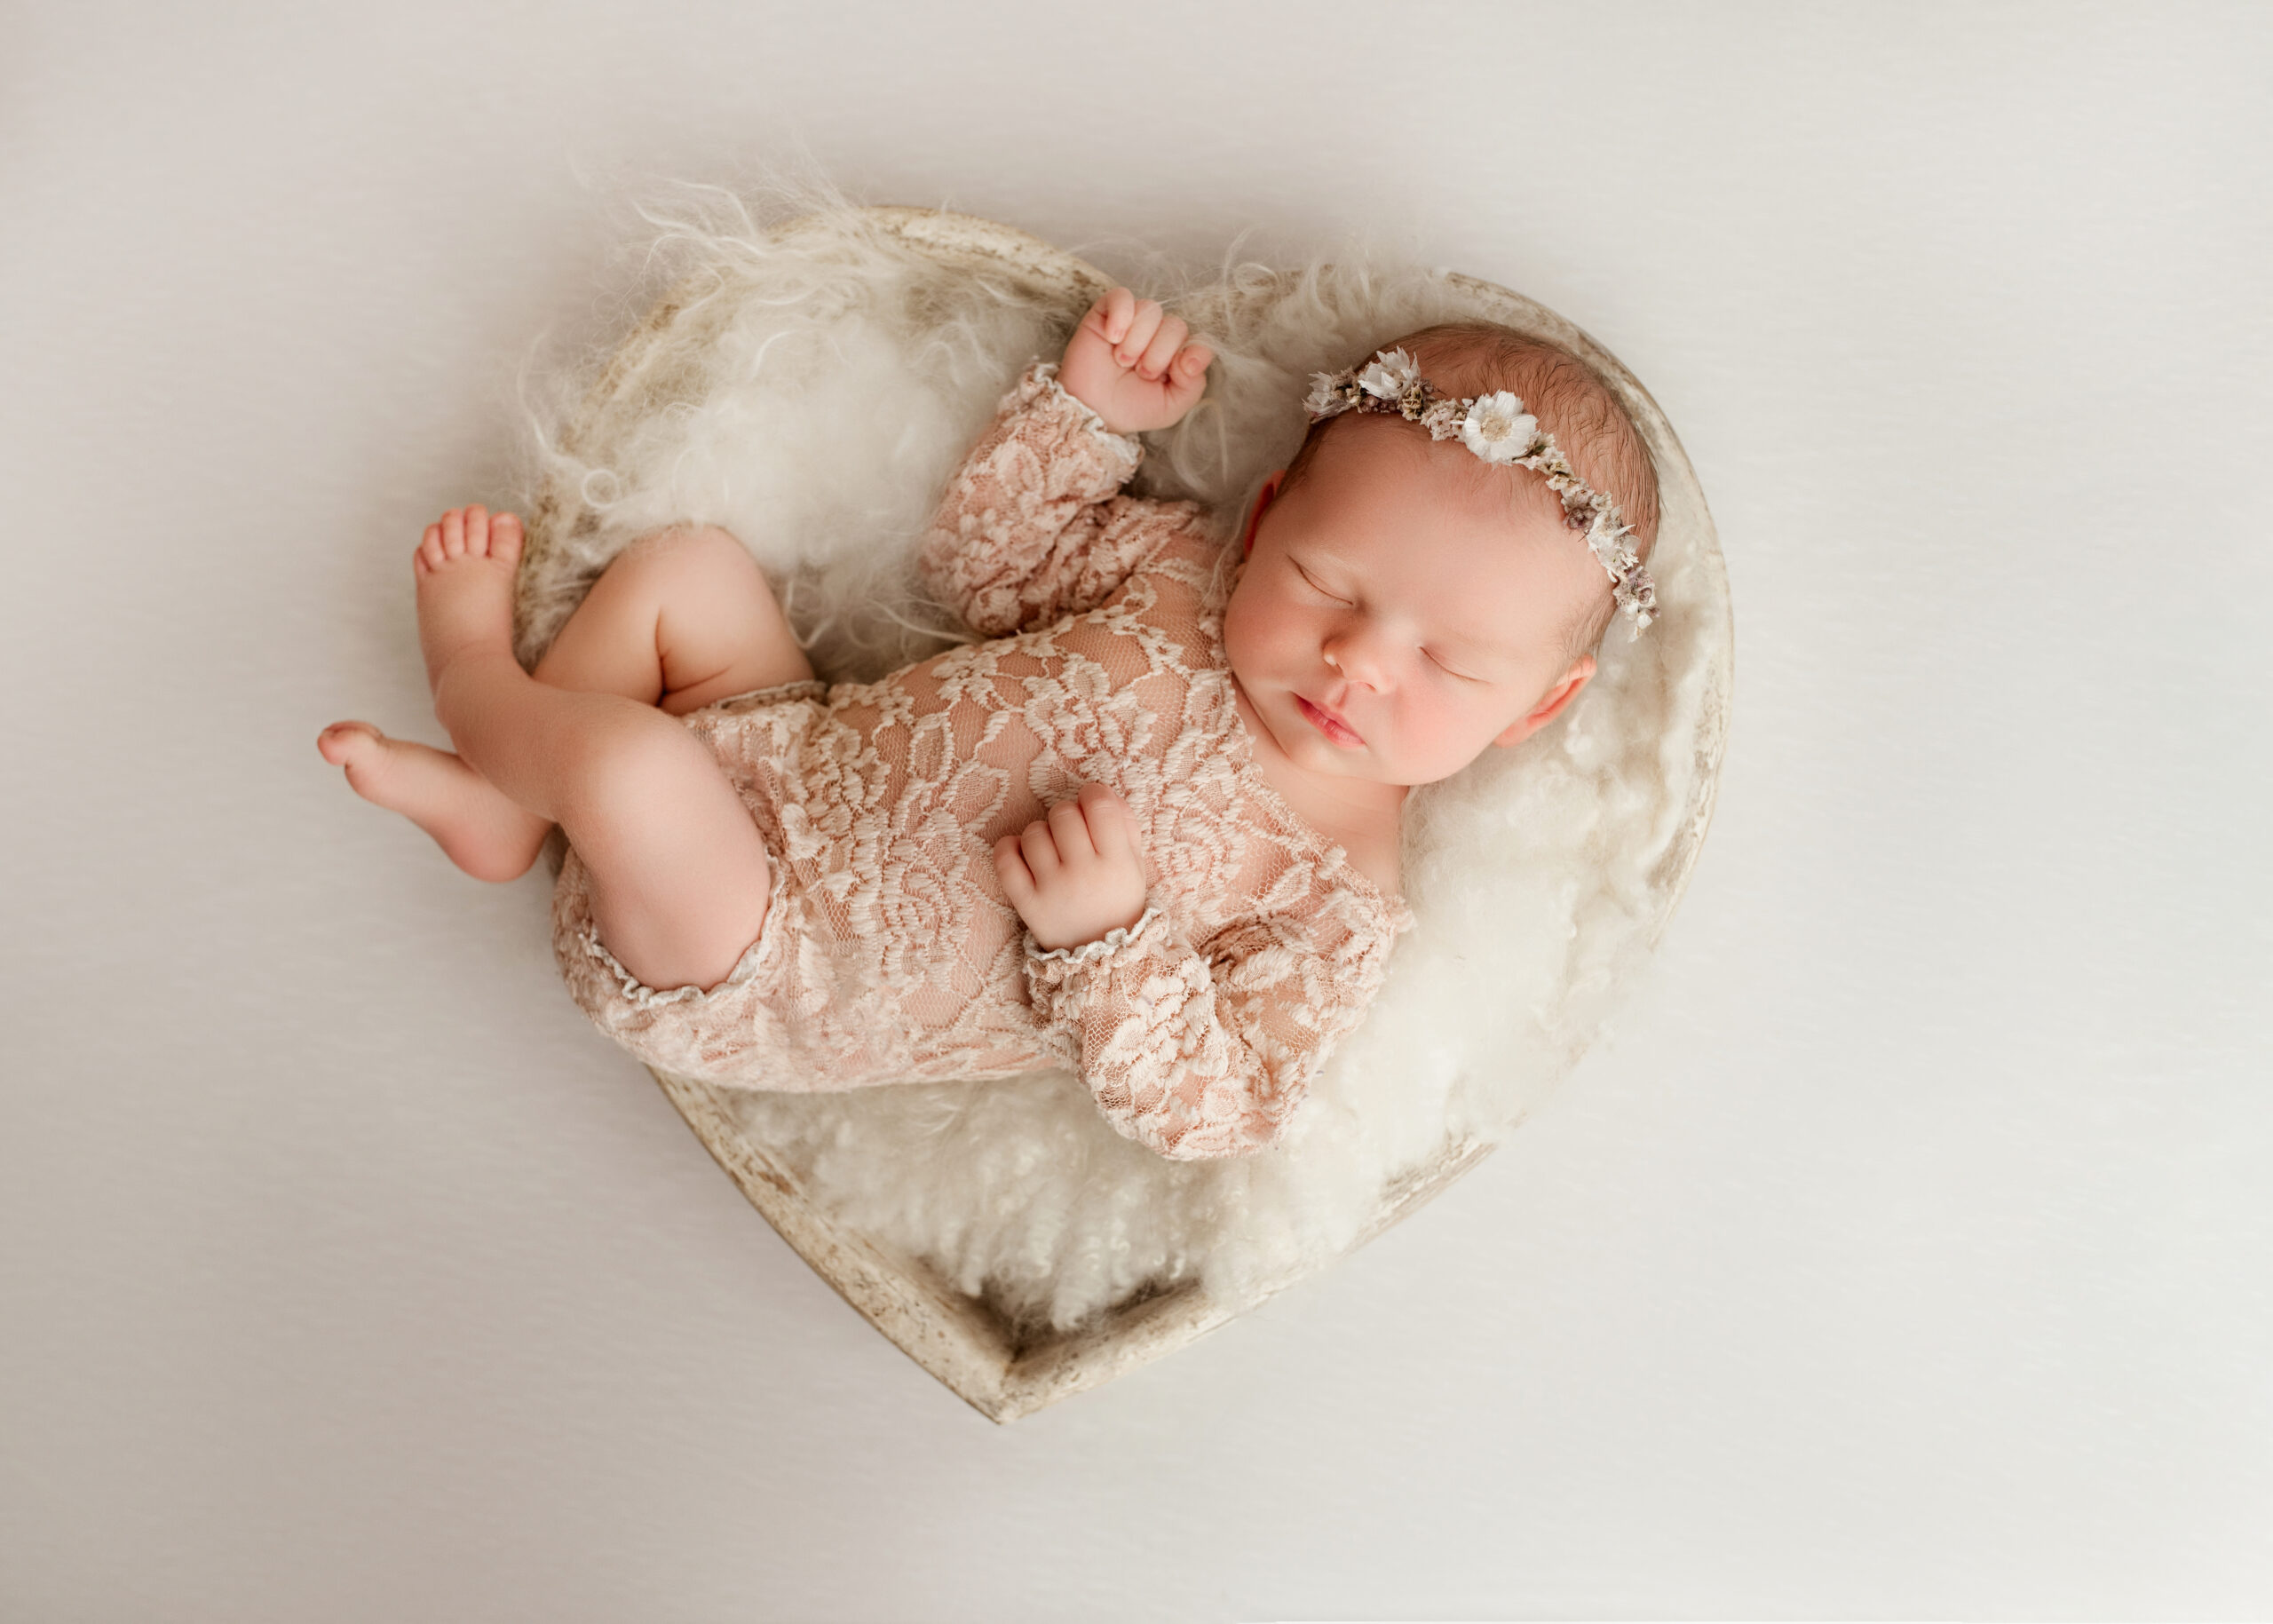 newborn laying in a heart bowl prop with fur and florals